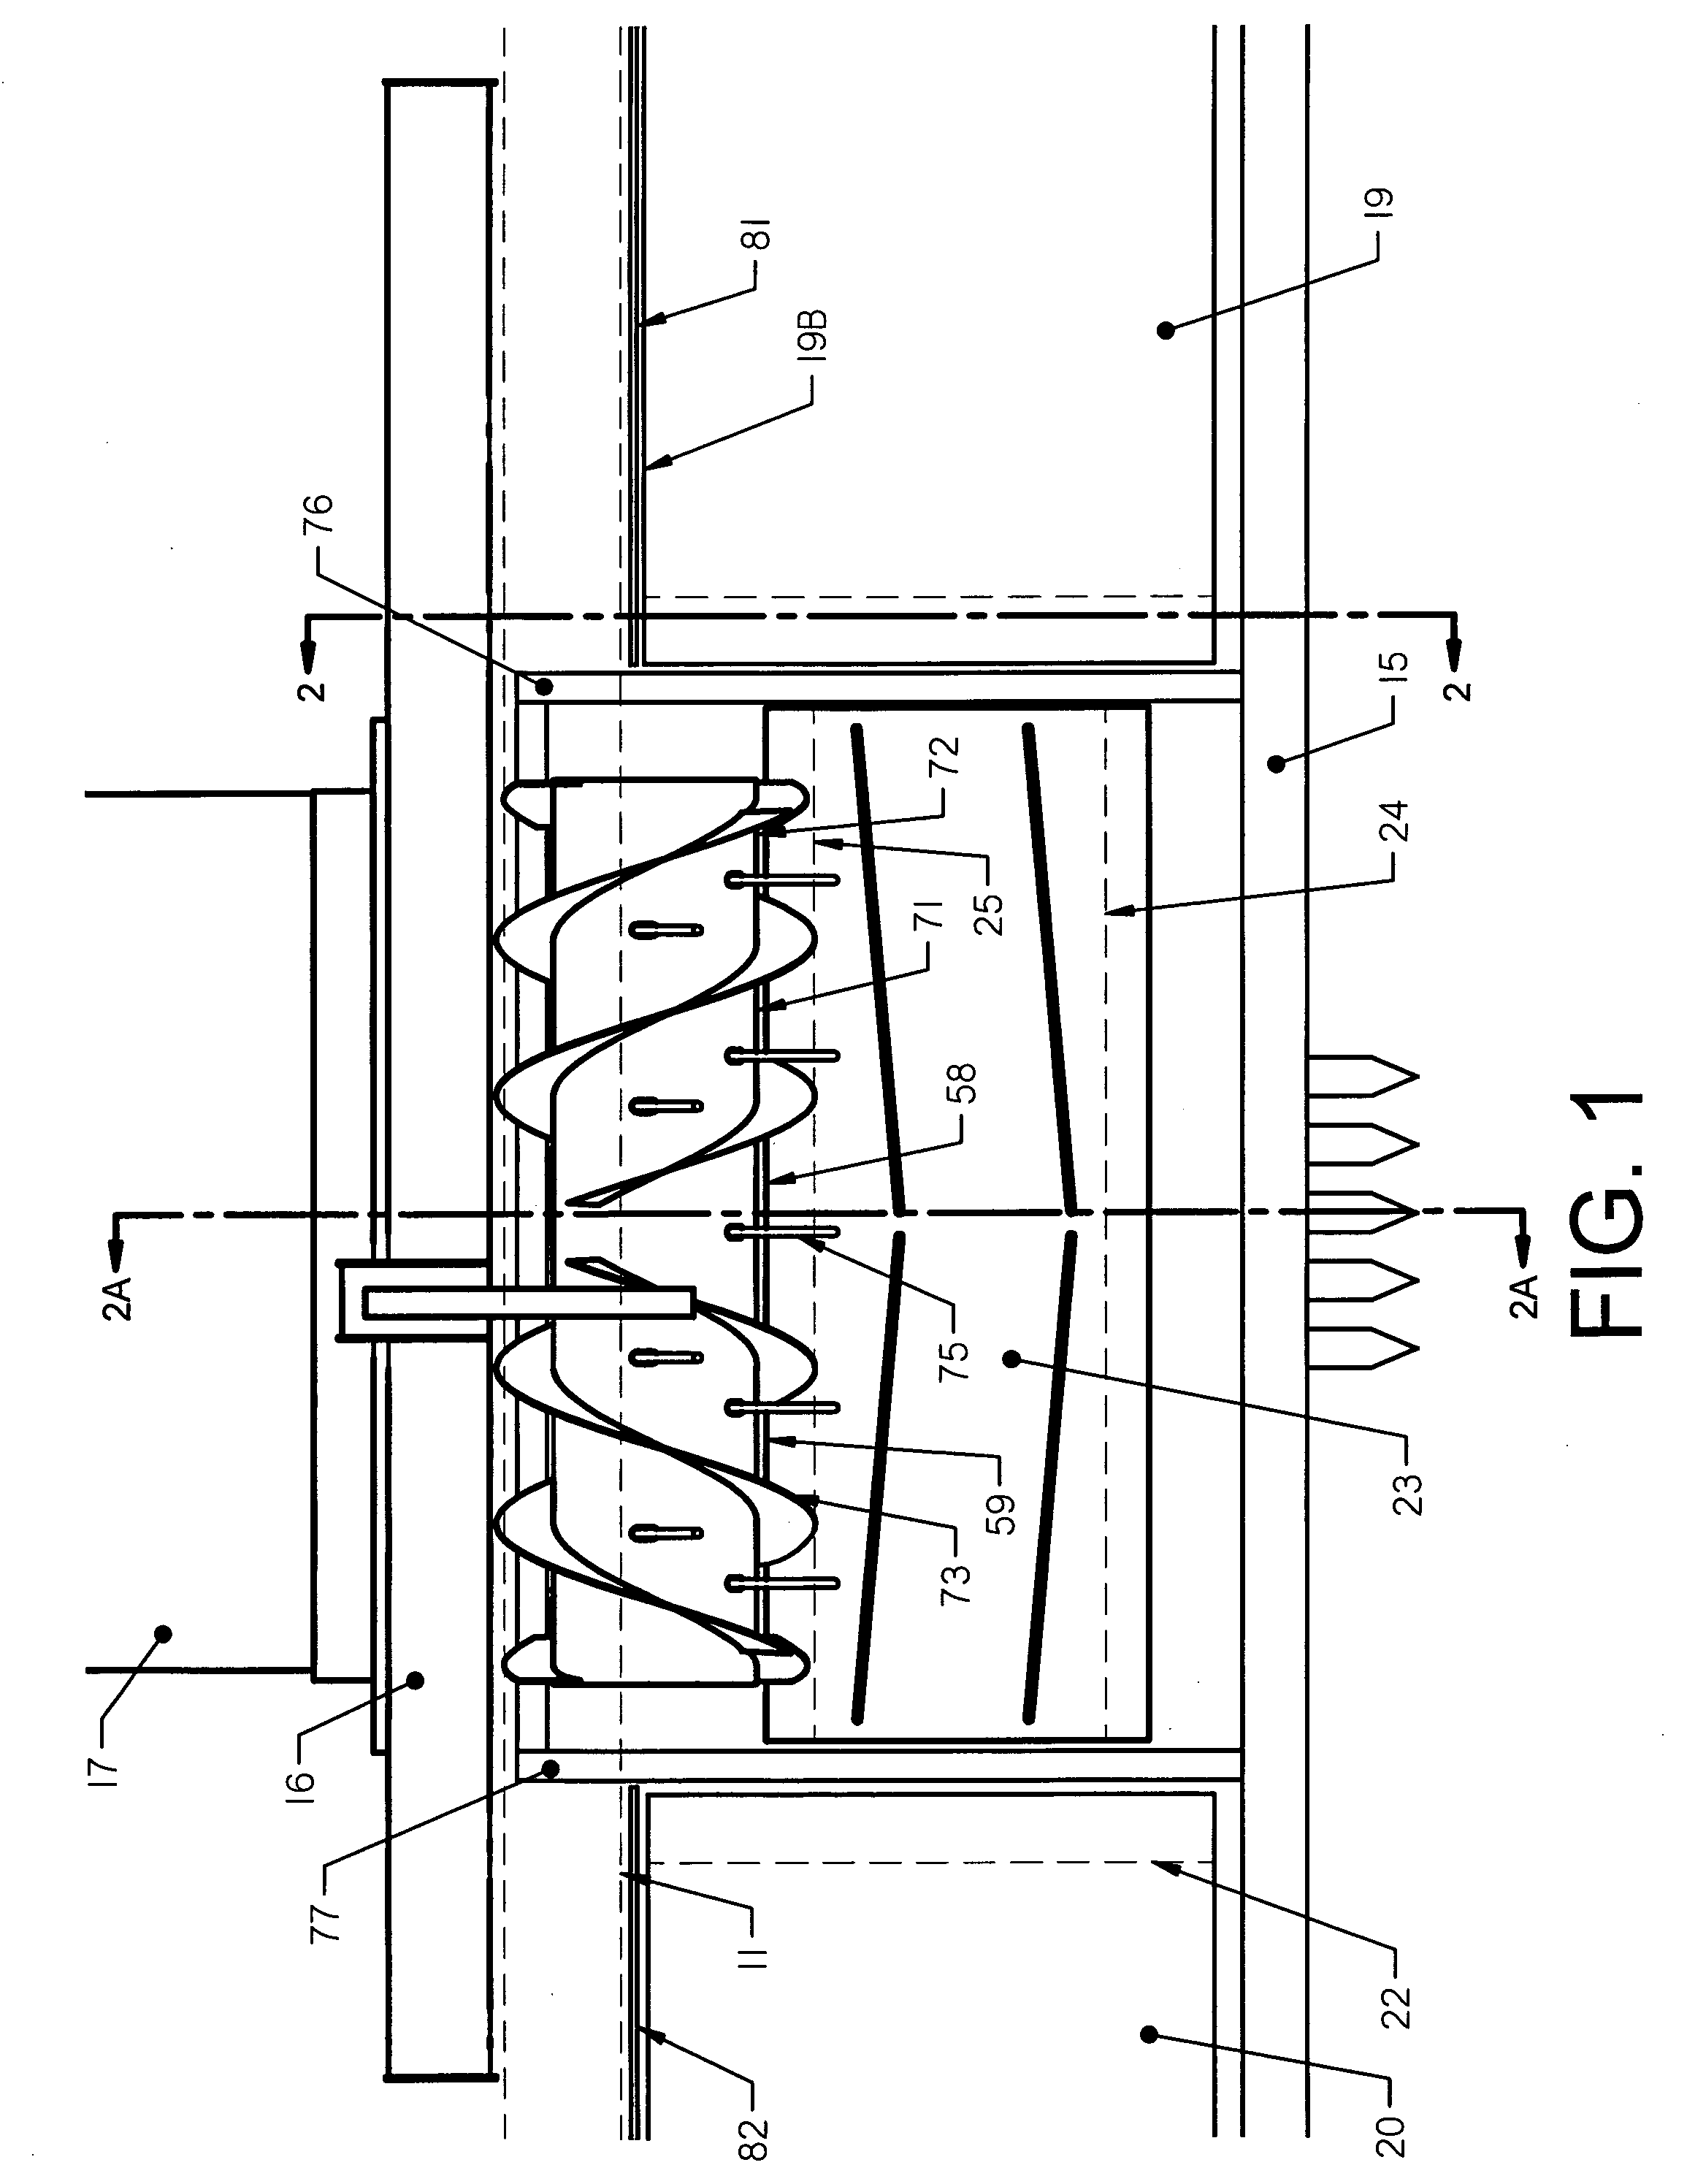 Crop feed arrangement for the header of a combine harvester